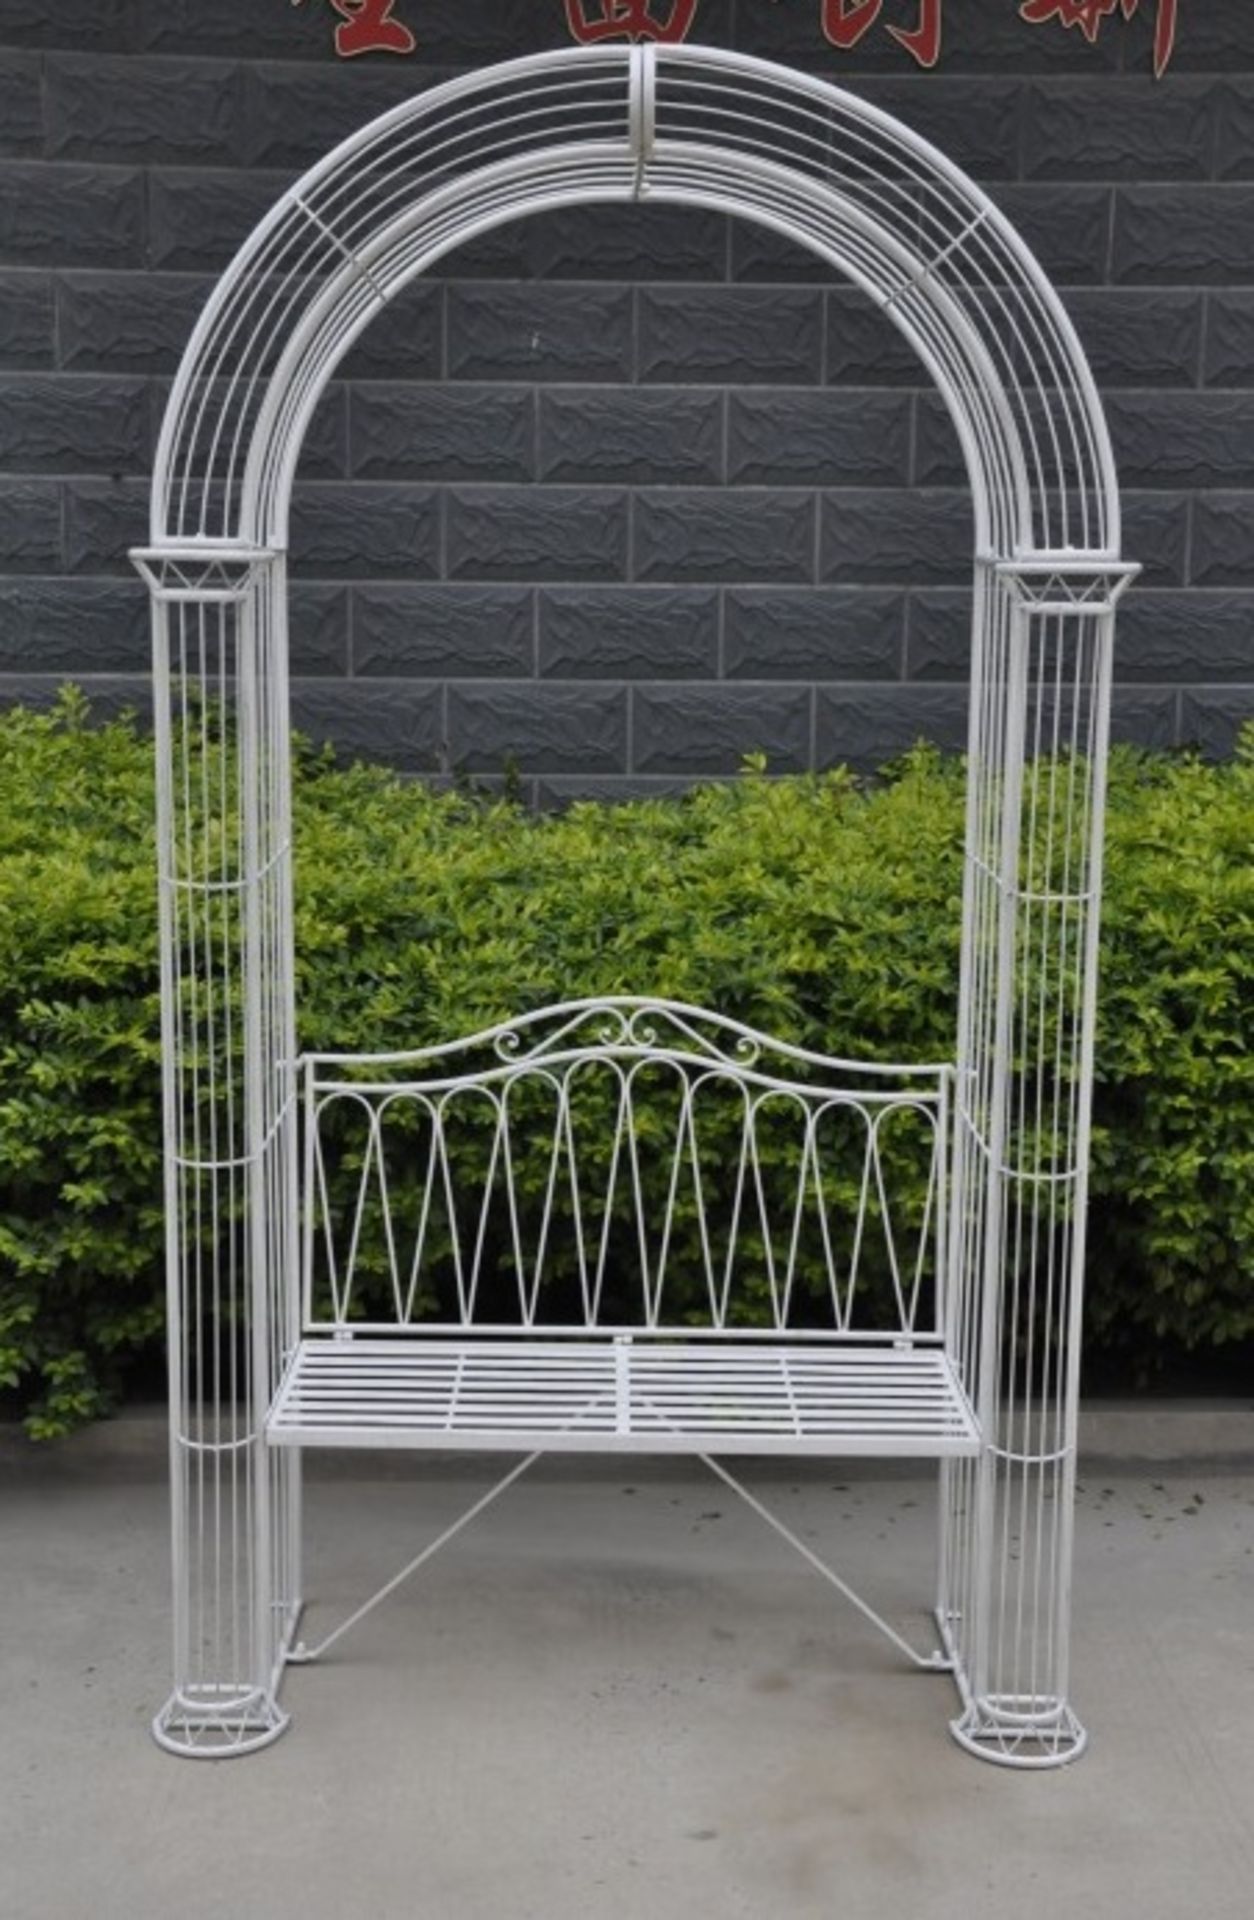 V Brand New Arbour Arch - Item is Green And Does Not Include Bench In Centre